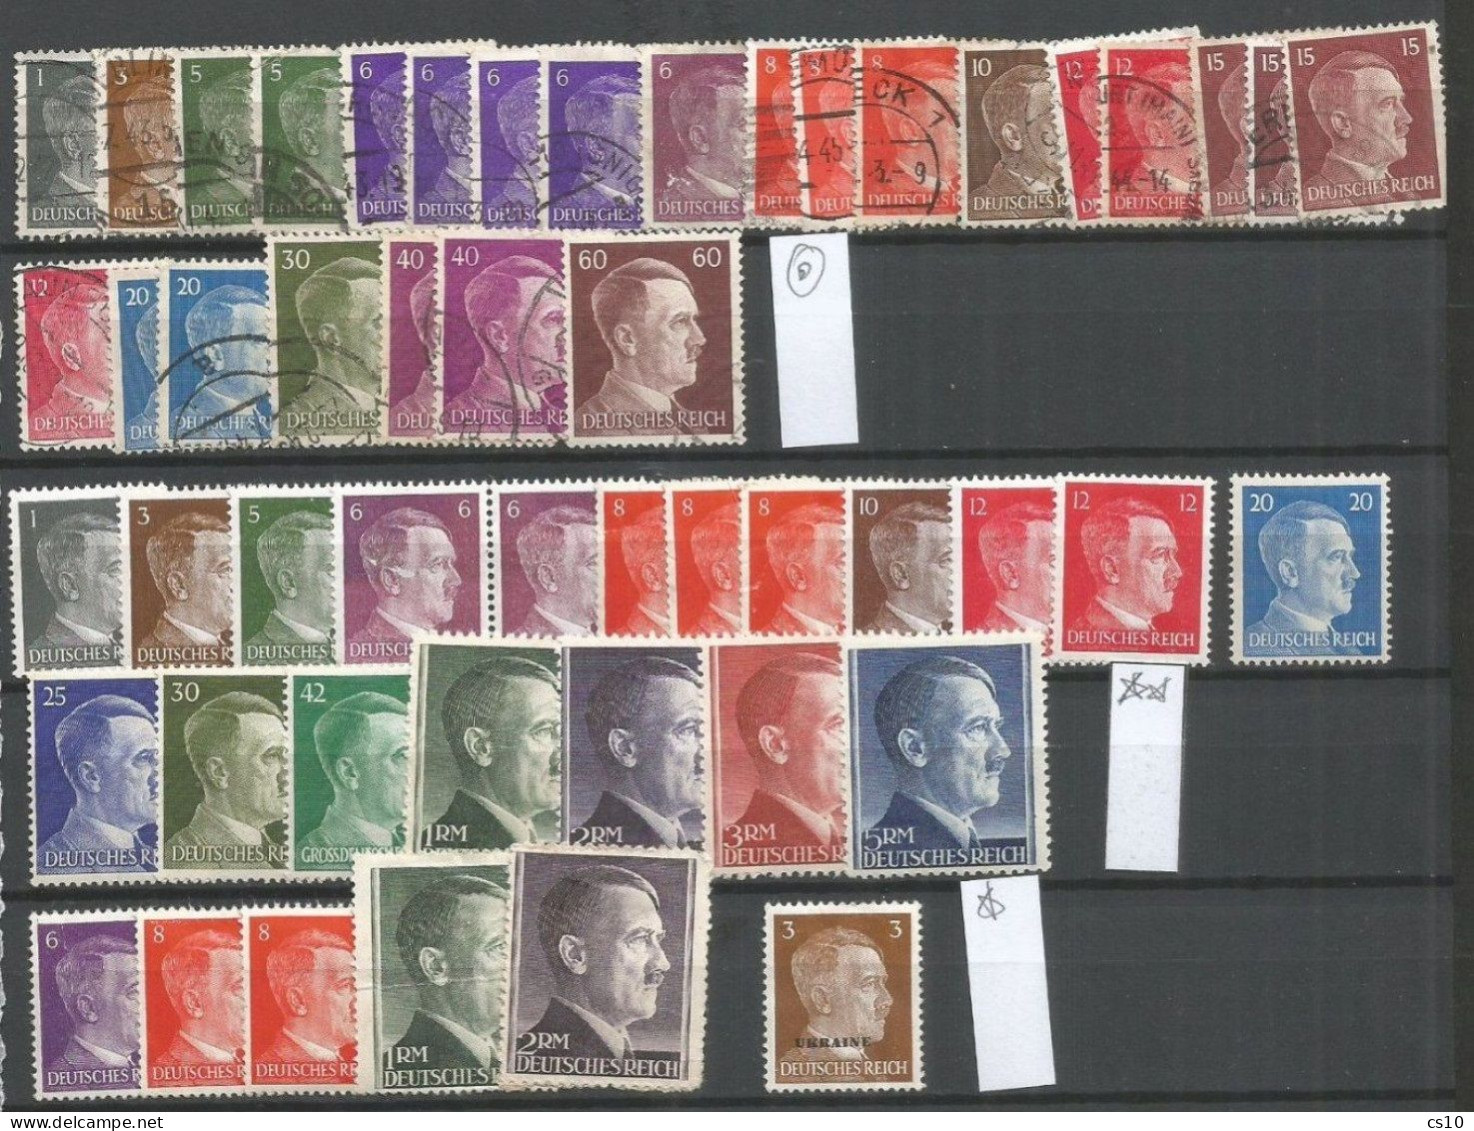 Germany 3rd Reich Regular Issue Kanzler 1941 Small Lot Of Used Pcs + Ukraine OVPT + Some MNH/MLH - Sammlungen